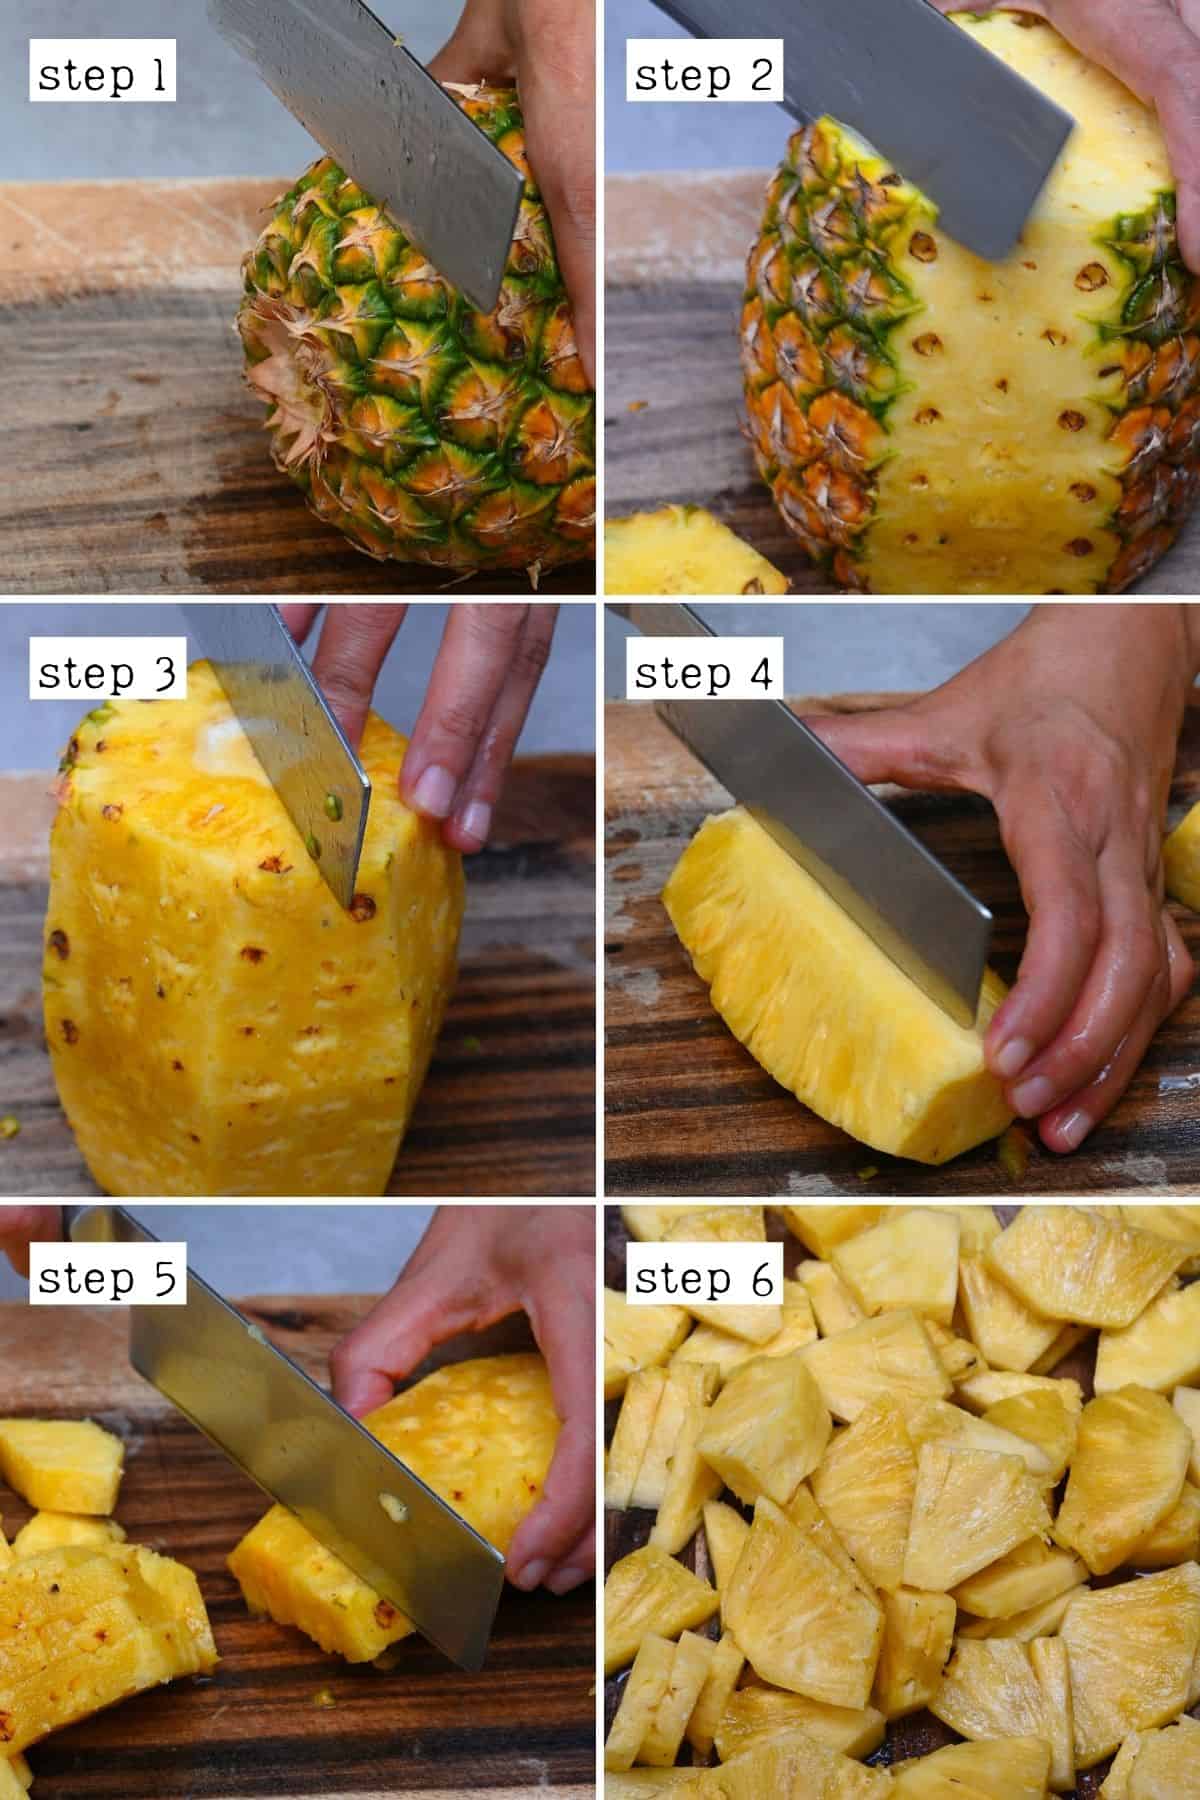 Steps for cutting pineapple